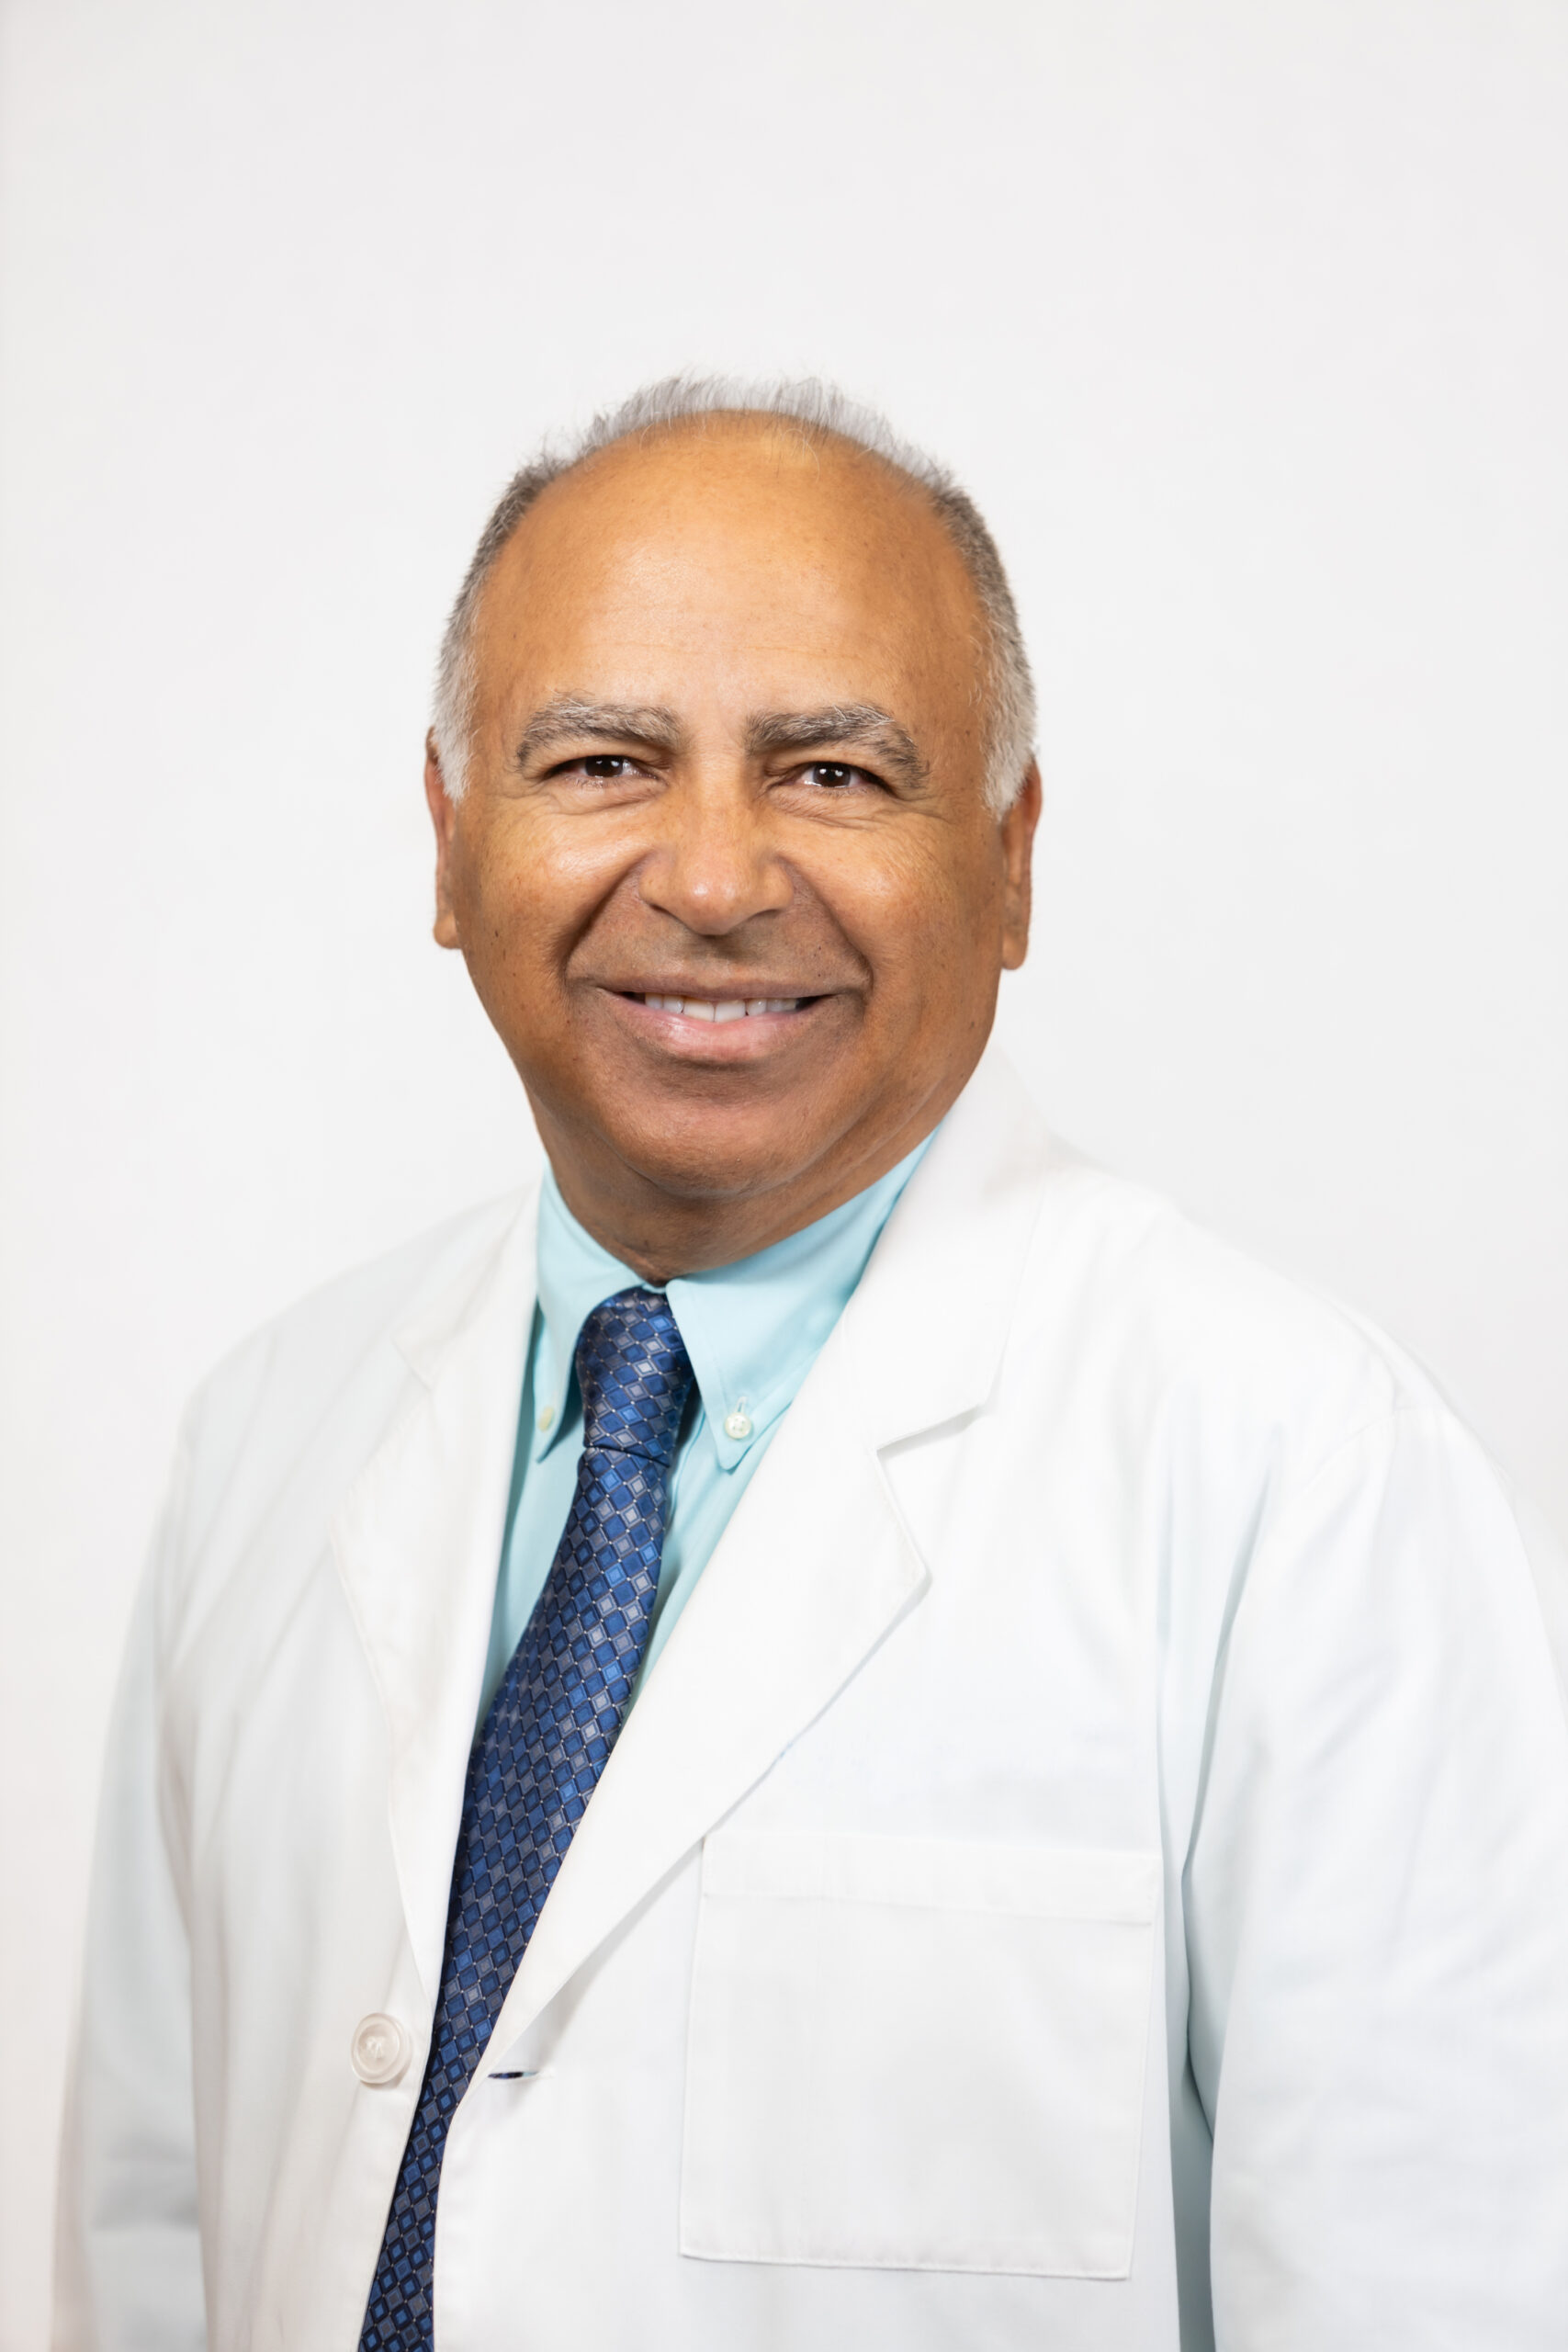 Naples’ Trusted Provider of Walk-in Medical Care for More Than 30 years, the Walk-in Clinic of Tyrone Medina, MD, Now Part of Pinnacle Health Specialists